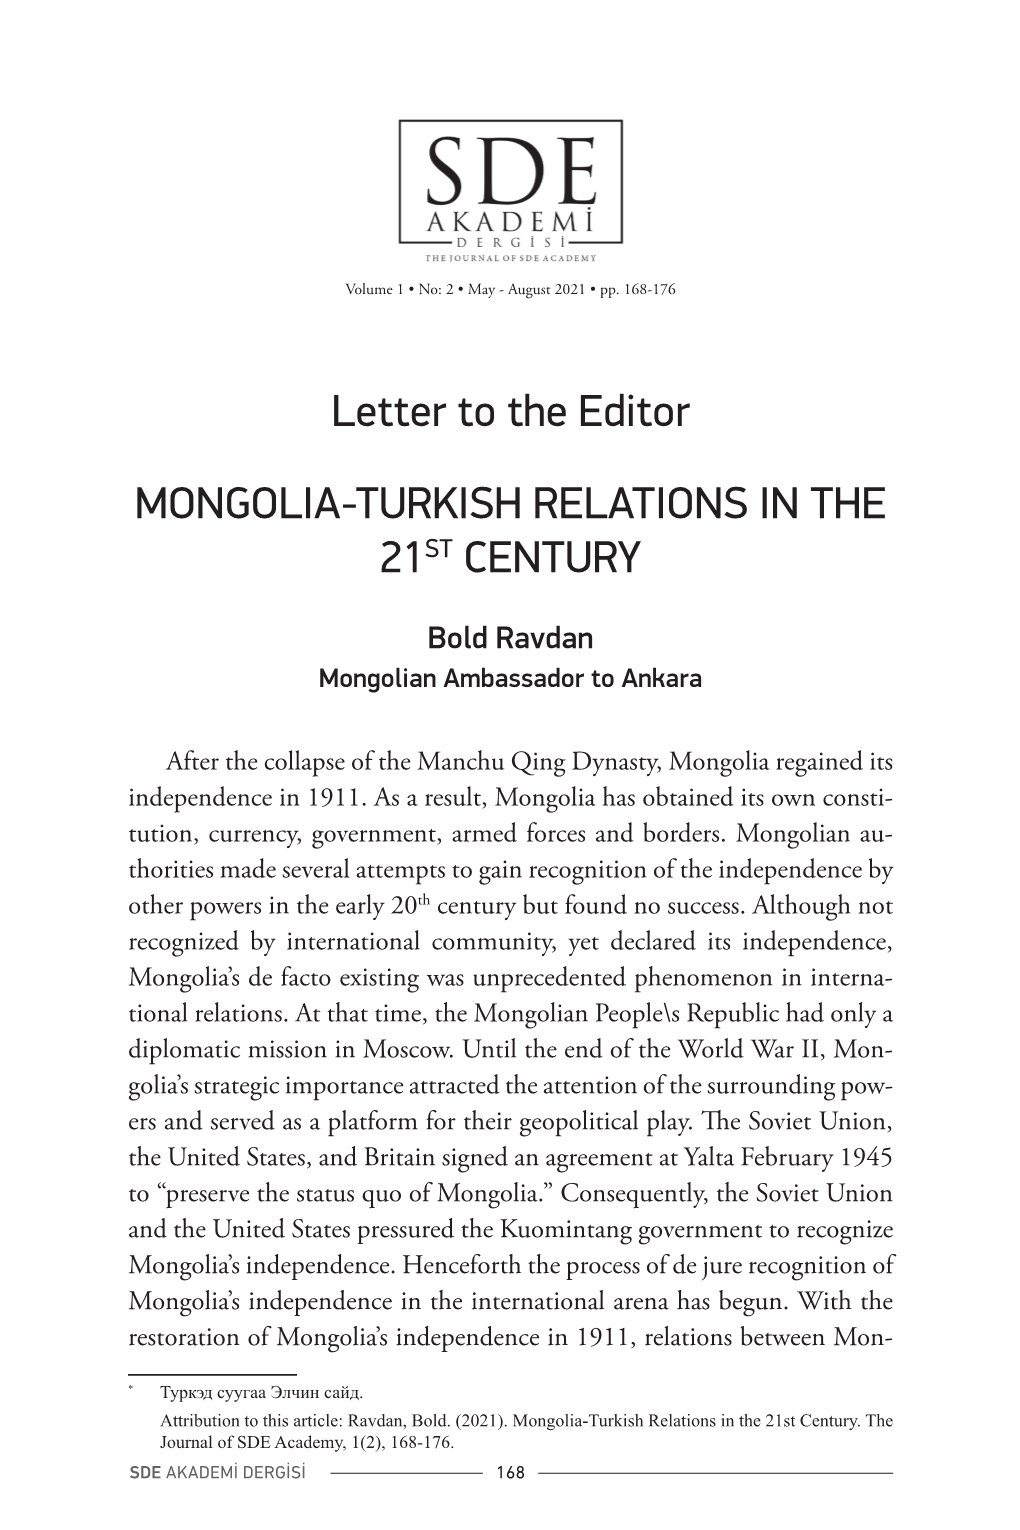 Letter to the Editor MONGOLIA-TURKISH RELATIONS